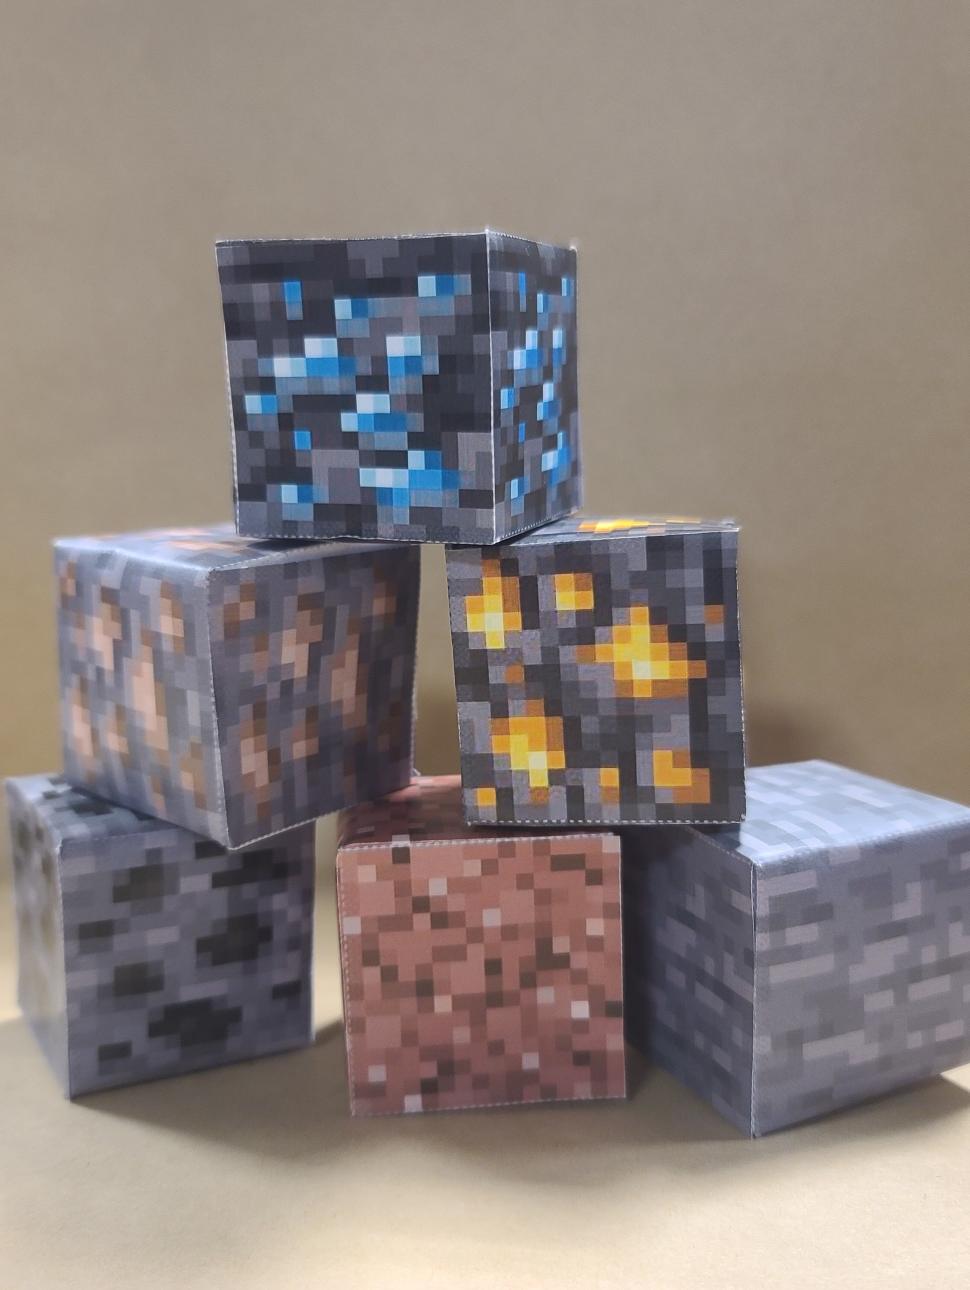 a stacked pile of paper blocks which are coloured in earthy colours pixellated as a popular video game.